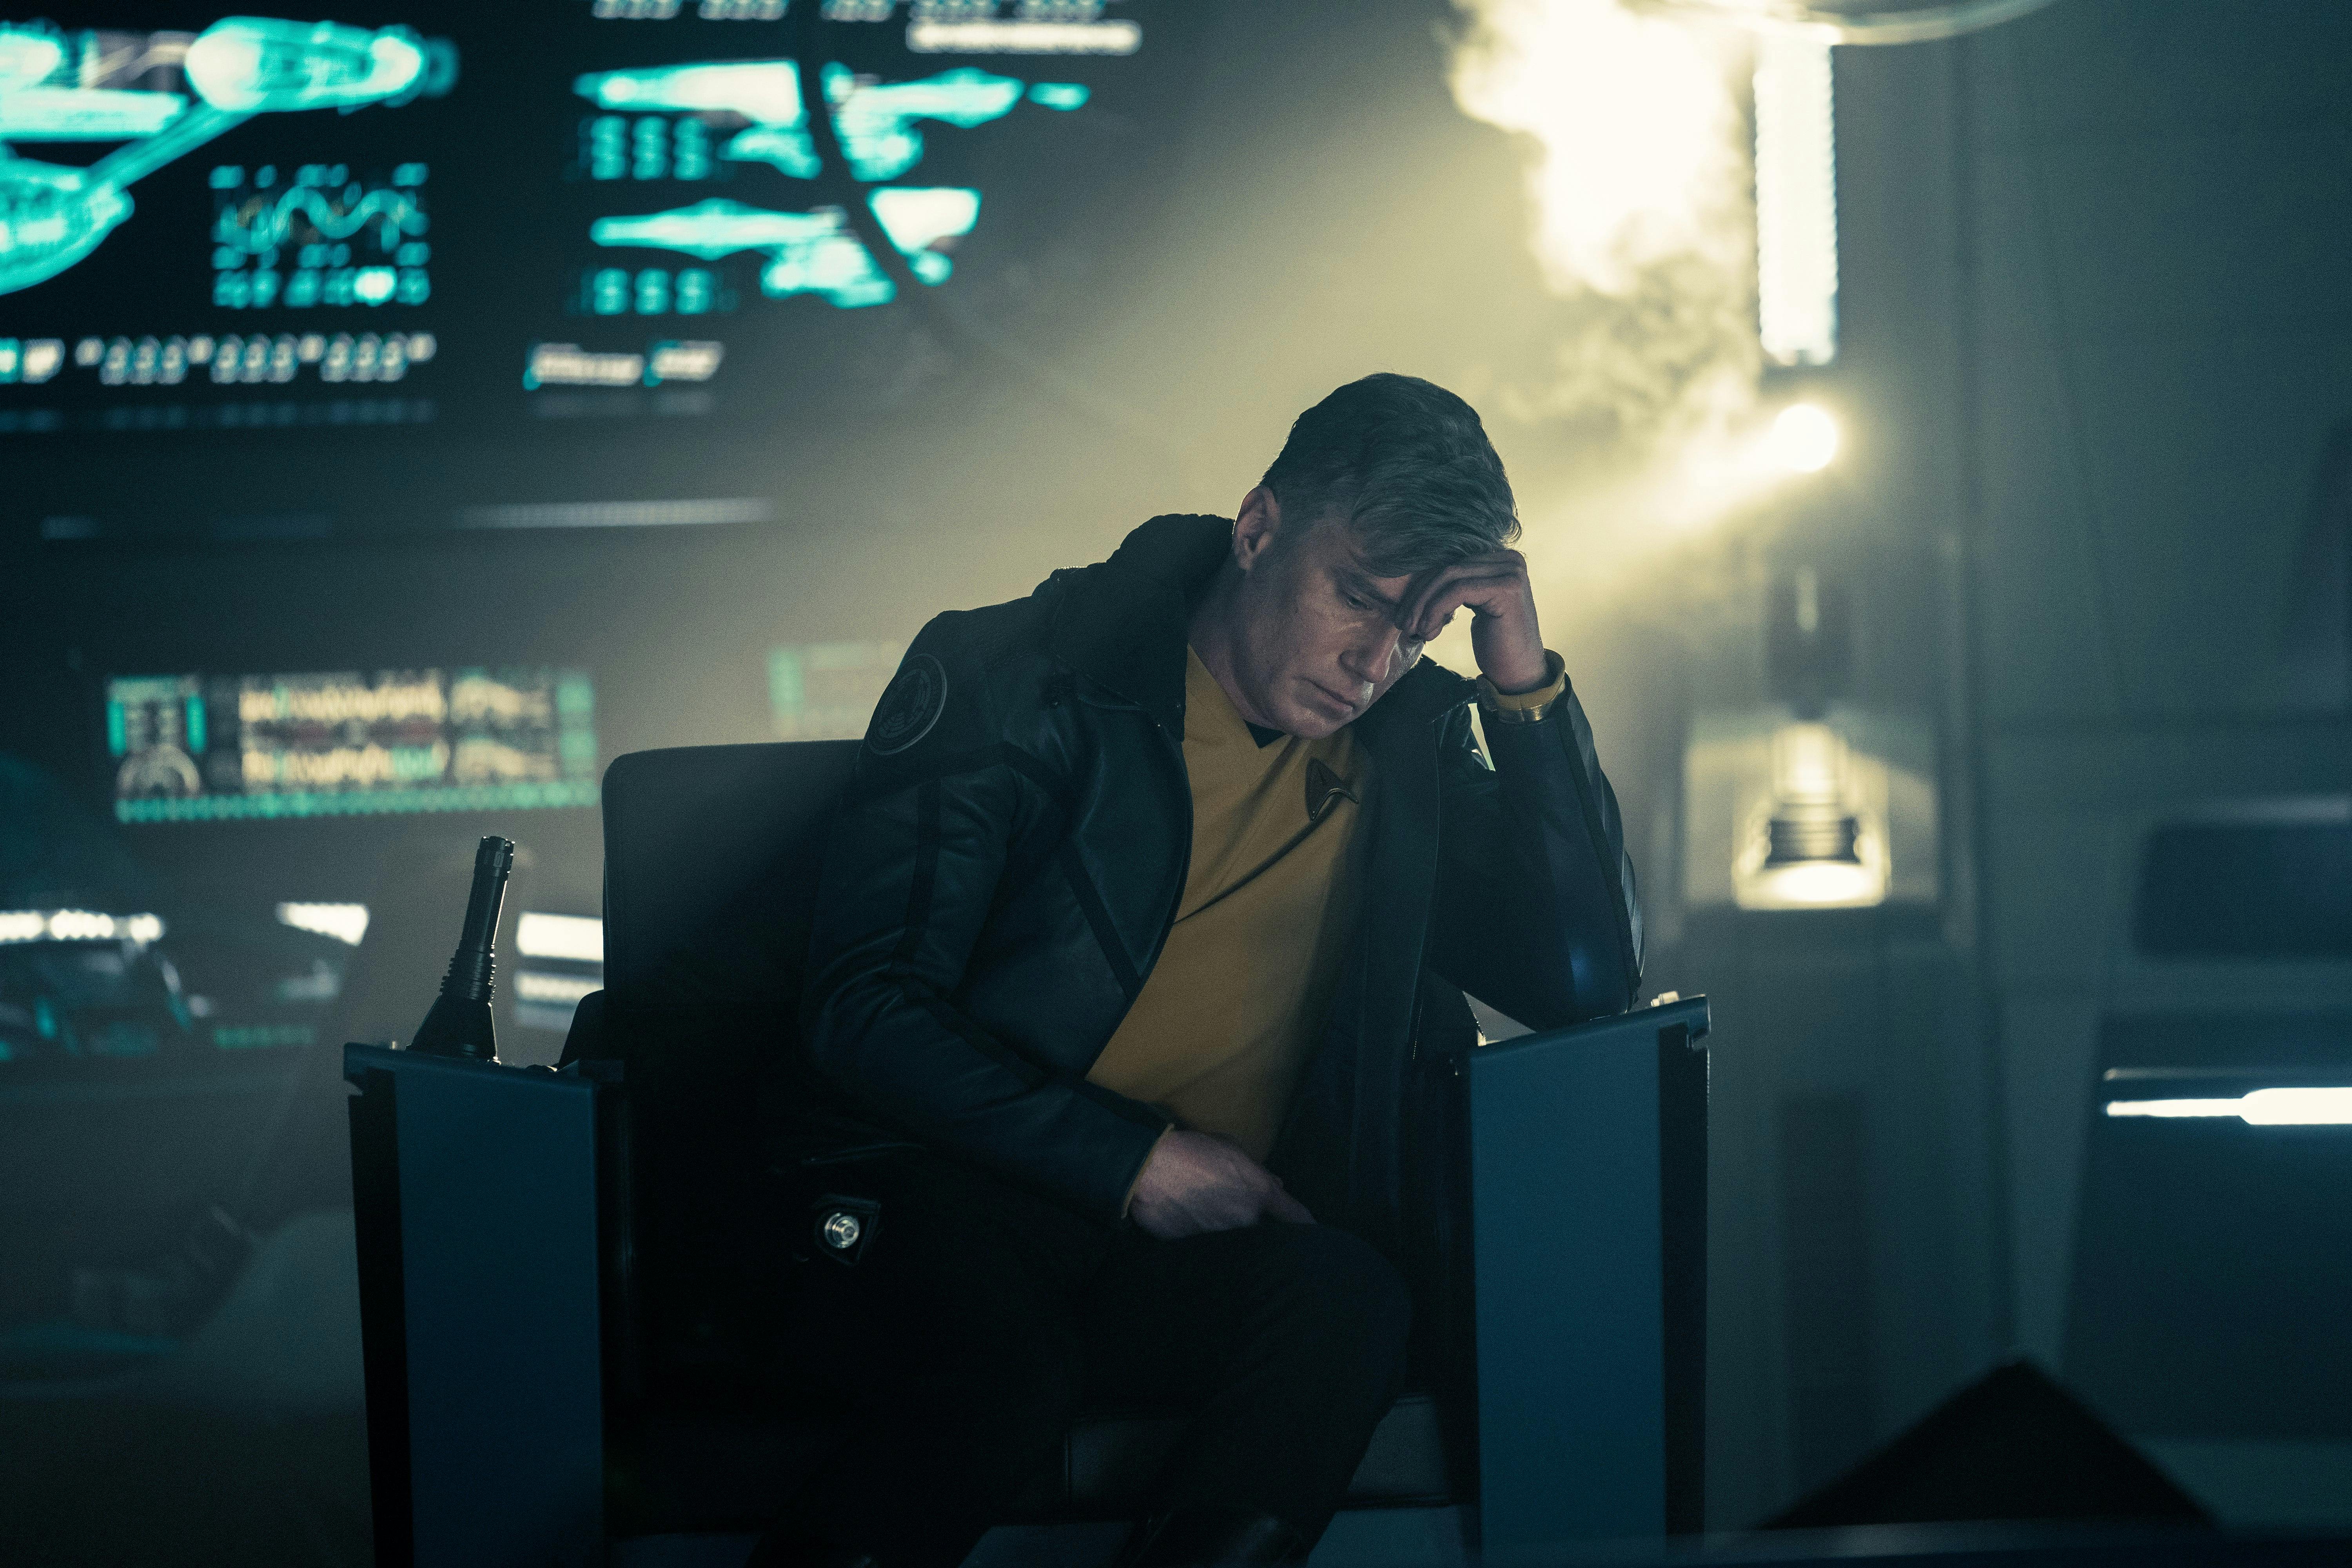 Captain Pike (Anson Mount) sits slumped over in a captain's chair. He is wearing a jacket over his uniform.